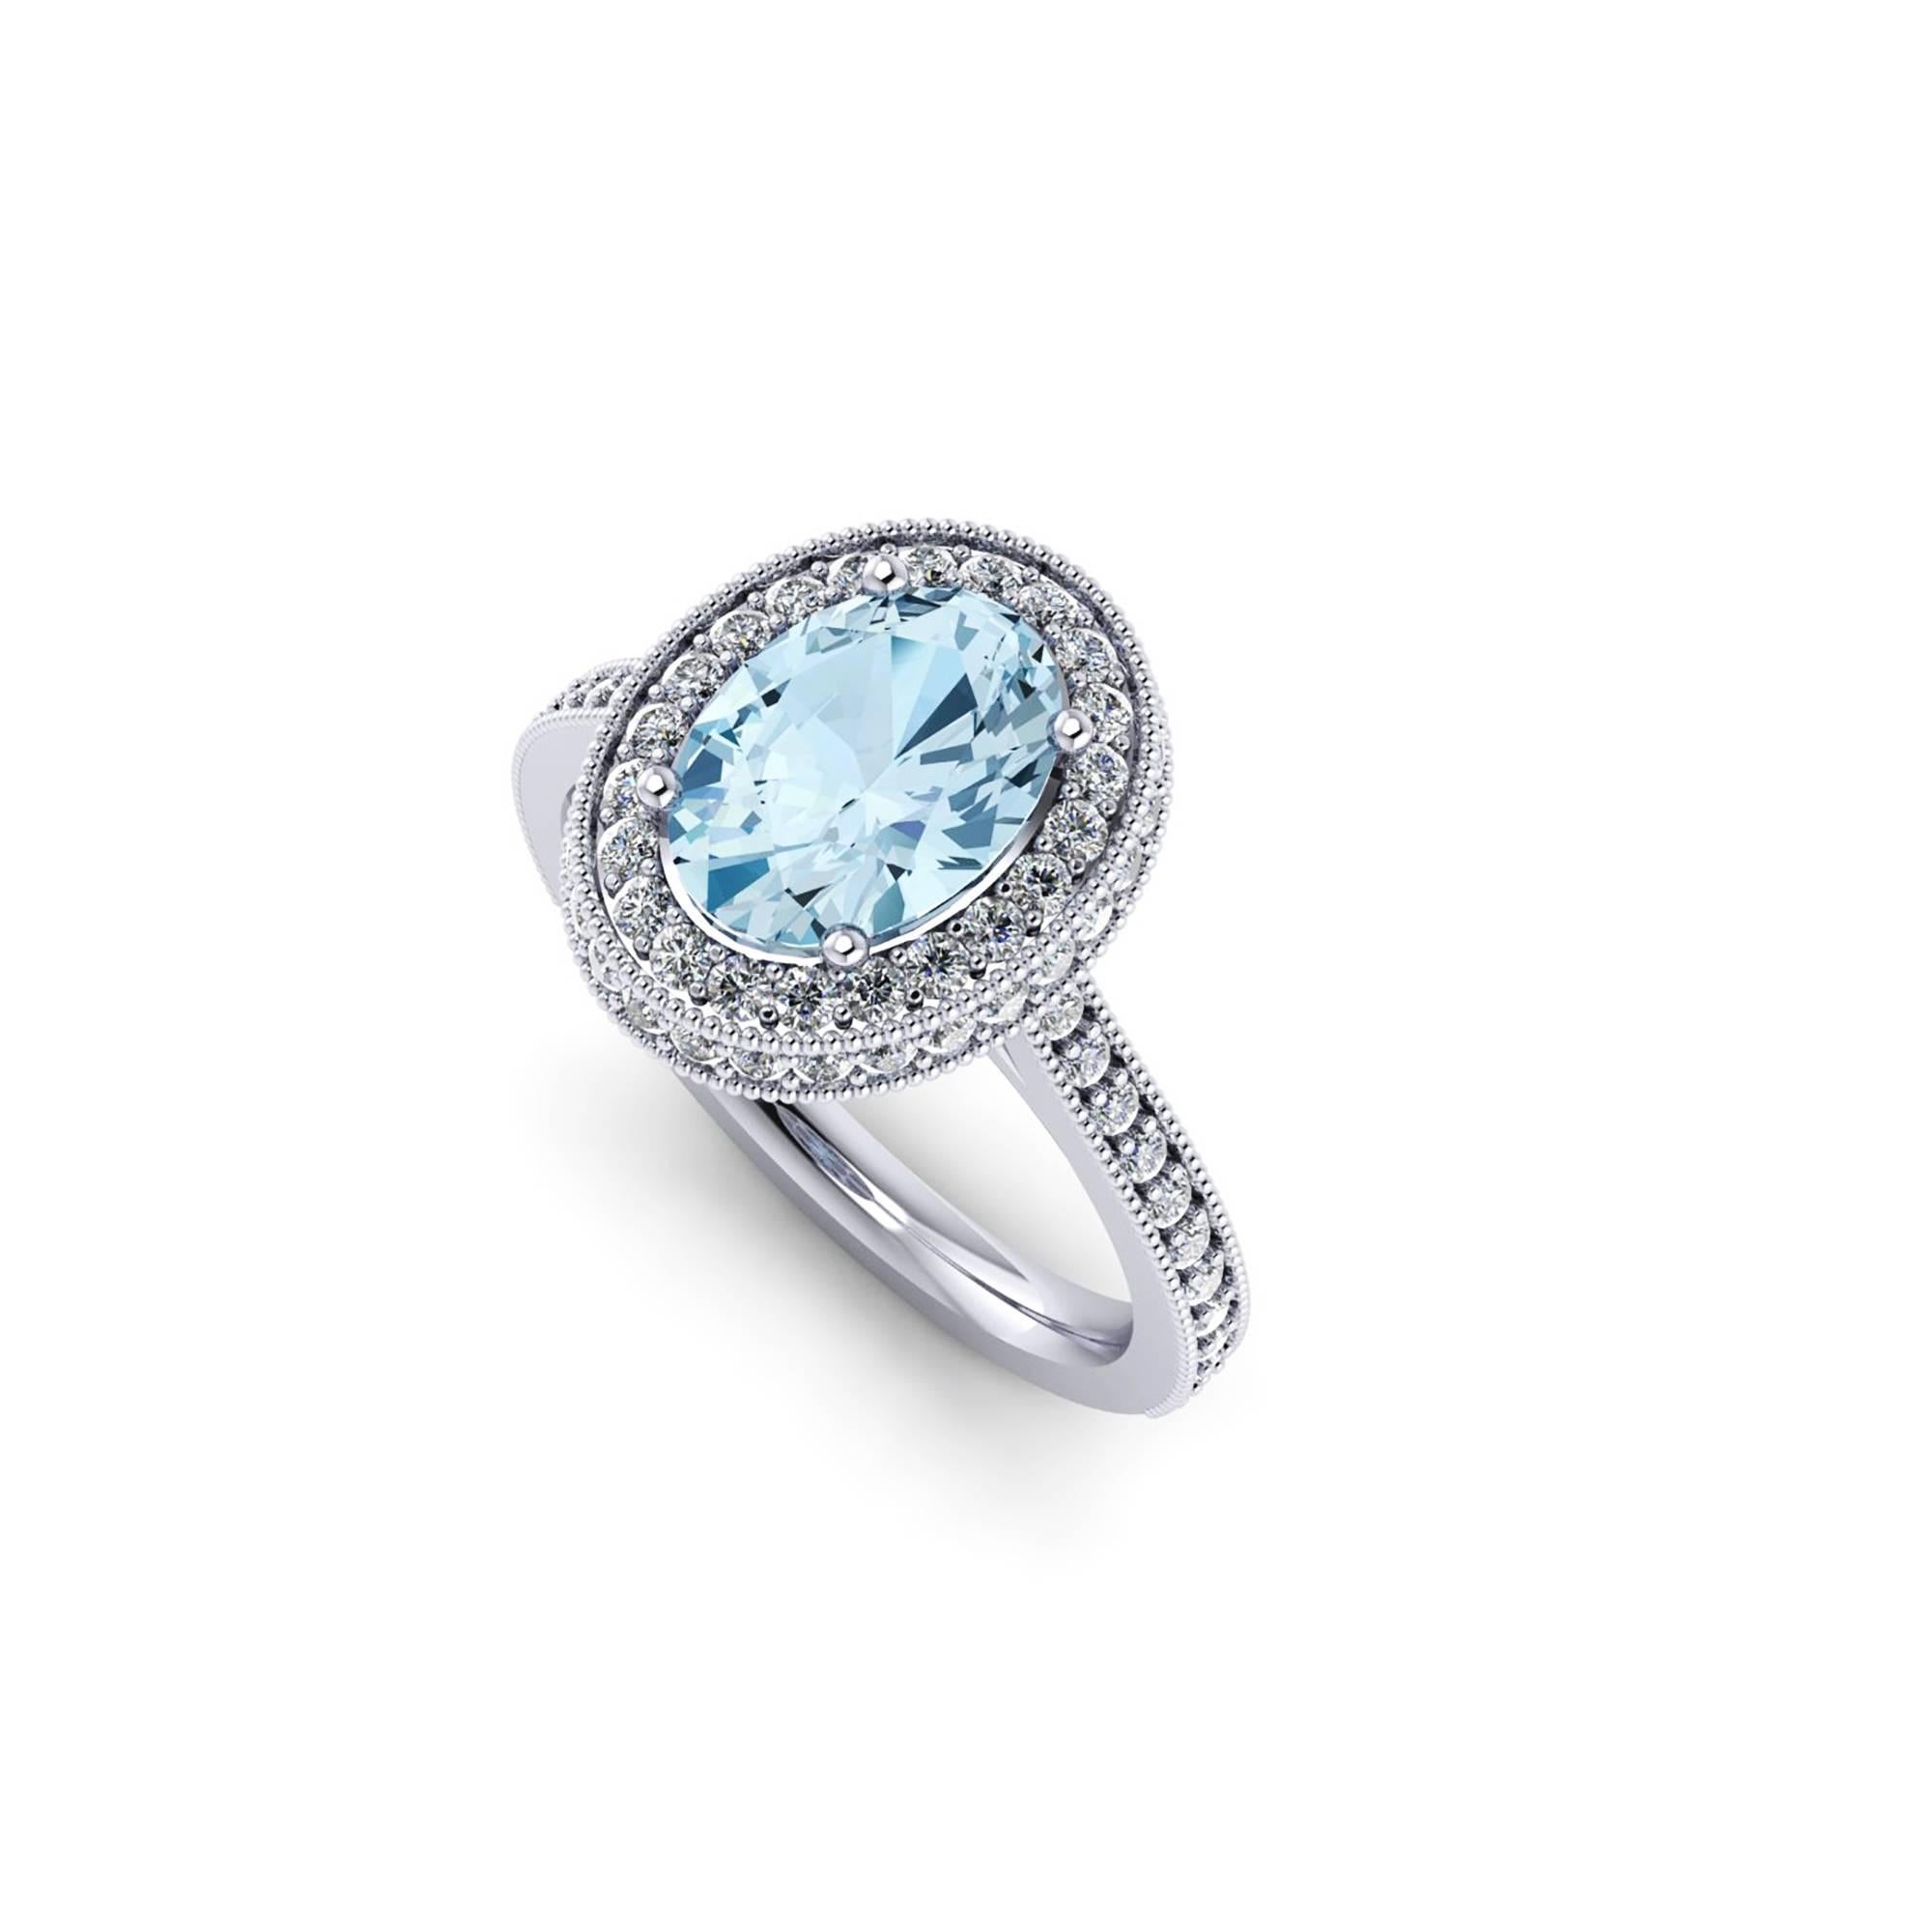 Ferrucci 1.40 carat natural oval Aquamarine adorned by a double halo of round bright diamonds for a total carat weight of 0.51 carats, conceived in a hand made 18k white gold ring.

Handcrafted with the best Italian manufacturing quality, a classic